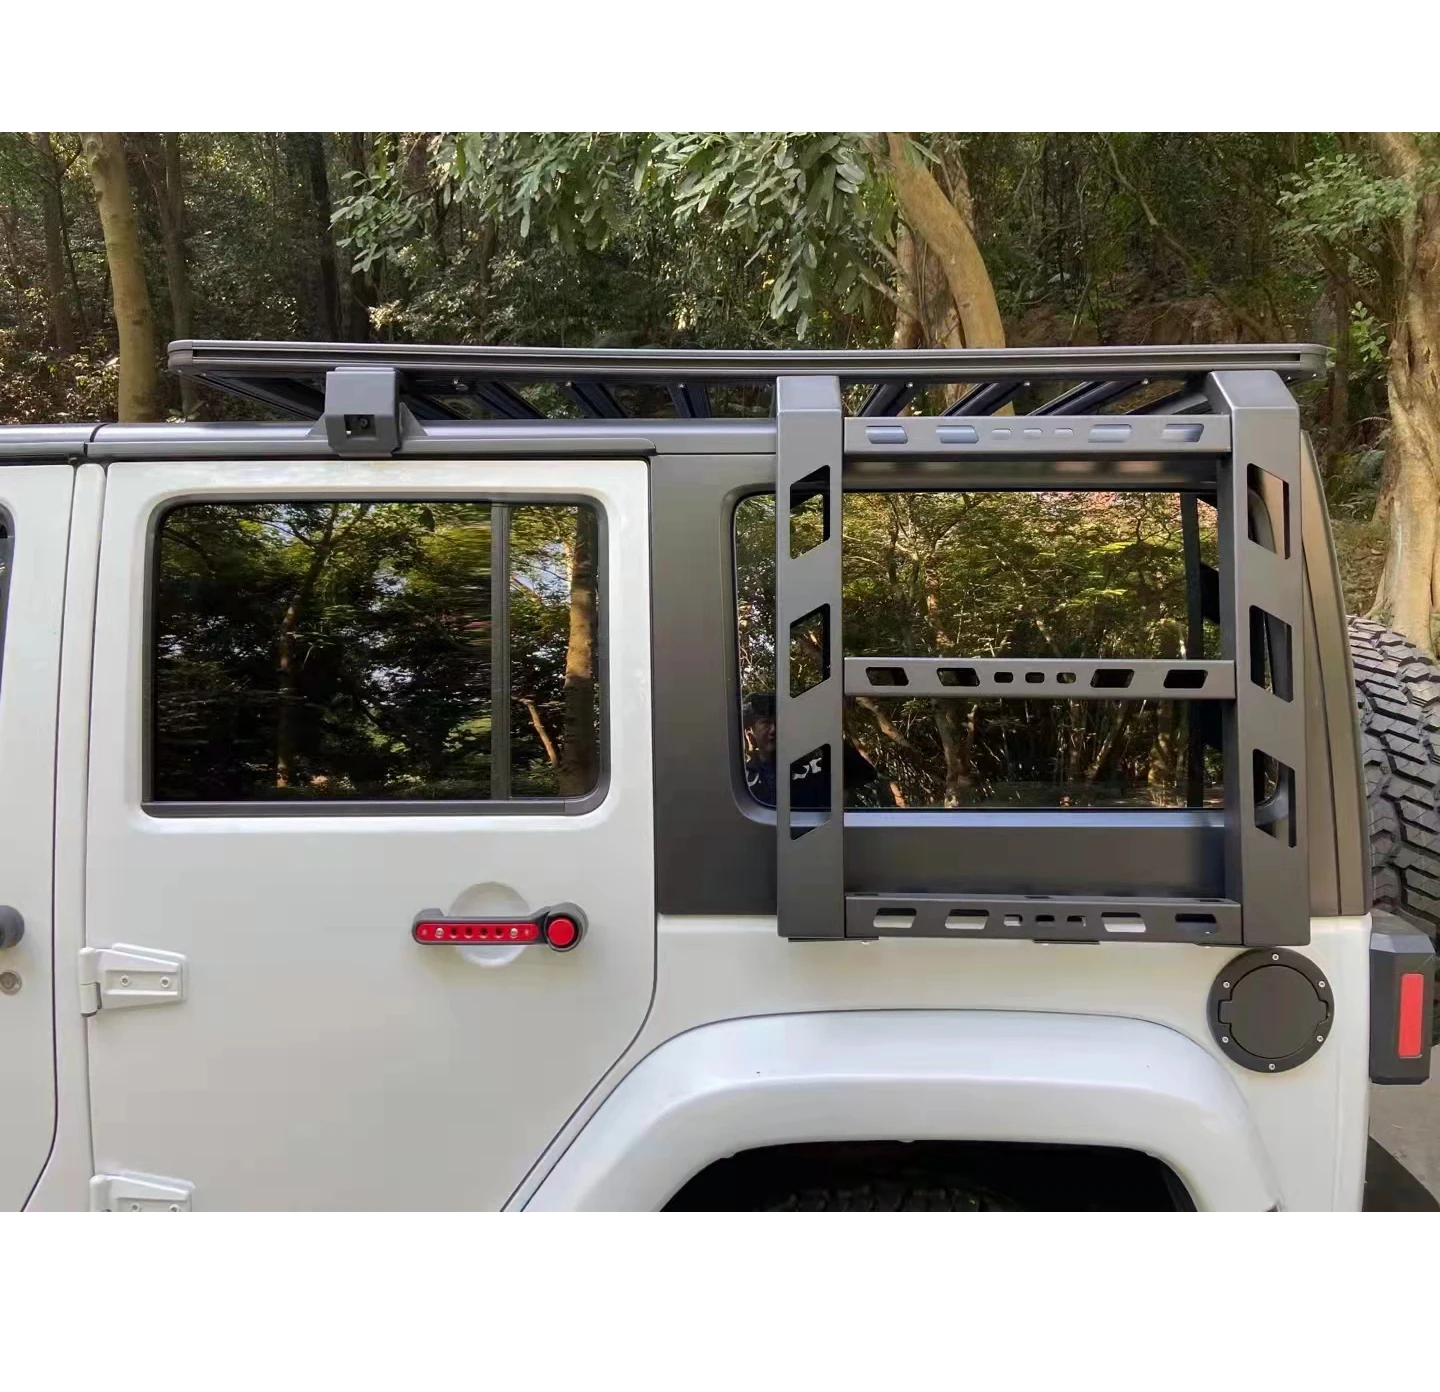 4x4 Aluminum Roof Rack For Jeep Wrangler Jk 07+ Offroad Car Accessories  Black Luggage Carrier - Buy Roof Rack For Jeep Wrangler,Luggage Rack,Accessories  For Jeep Wrangler Product on 